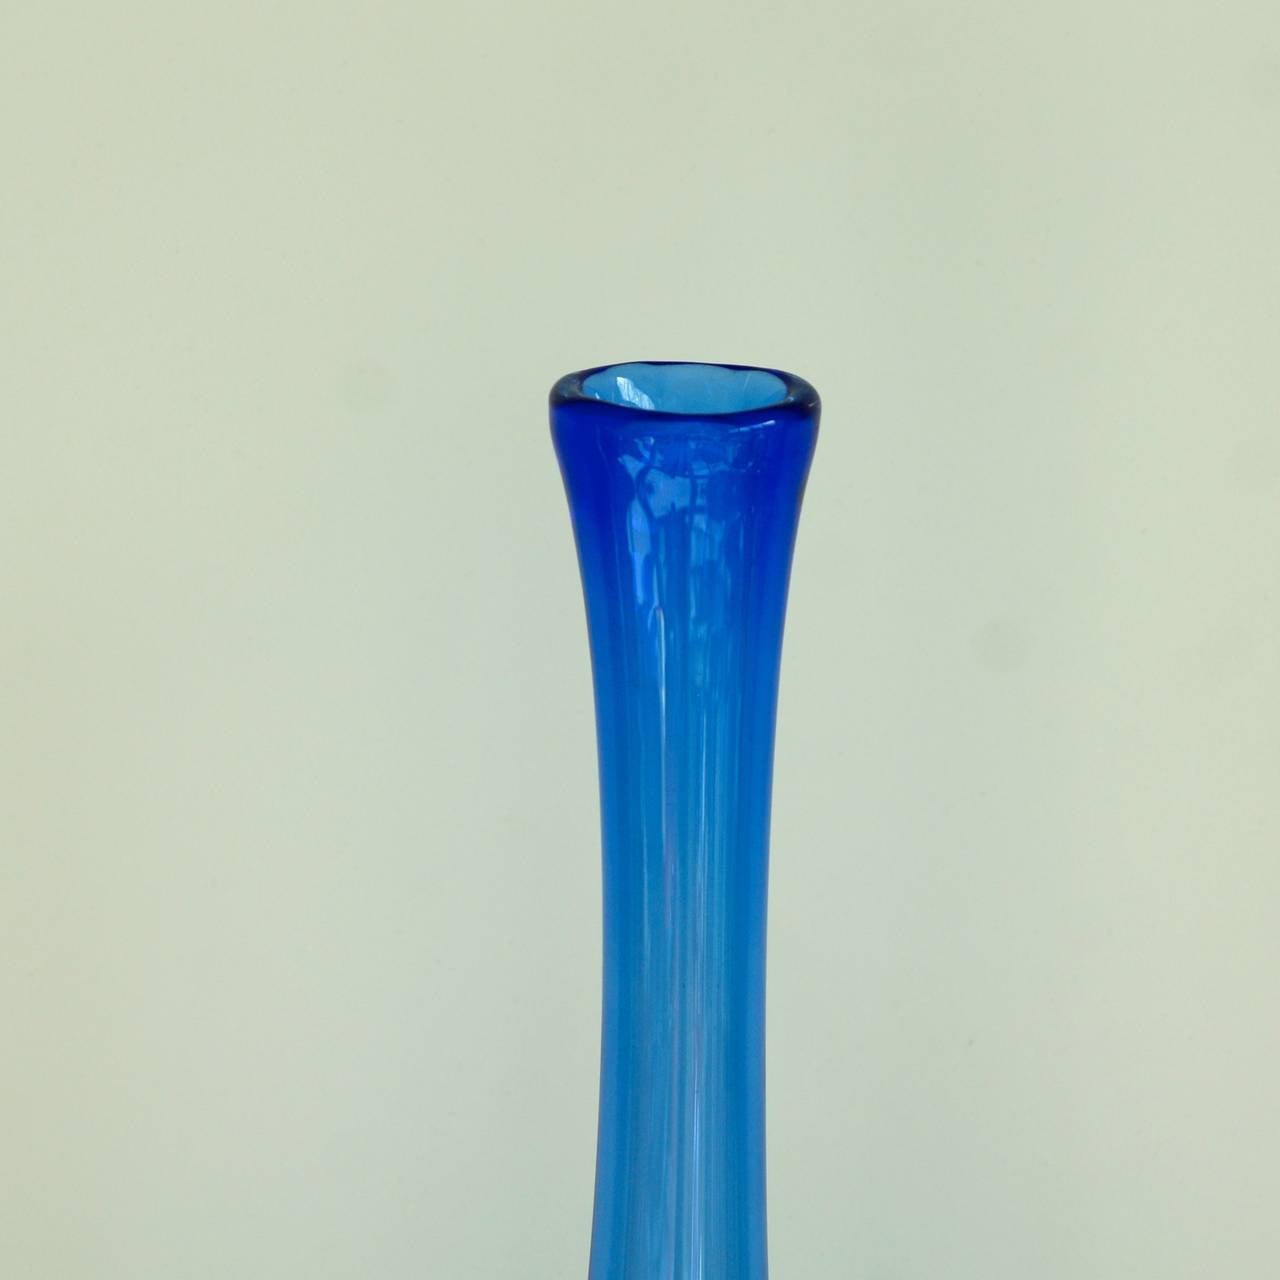 Tall Vase with Long Neck, Leerdam Unica, Floris Meydam In Good Condition For Sale In Amsterdam, NL